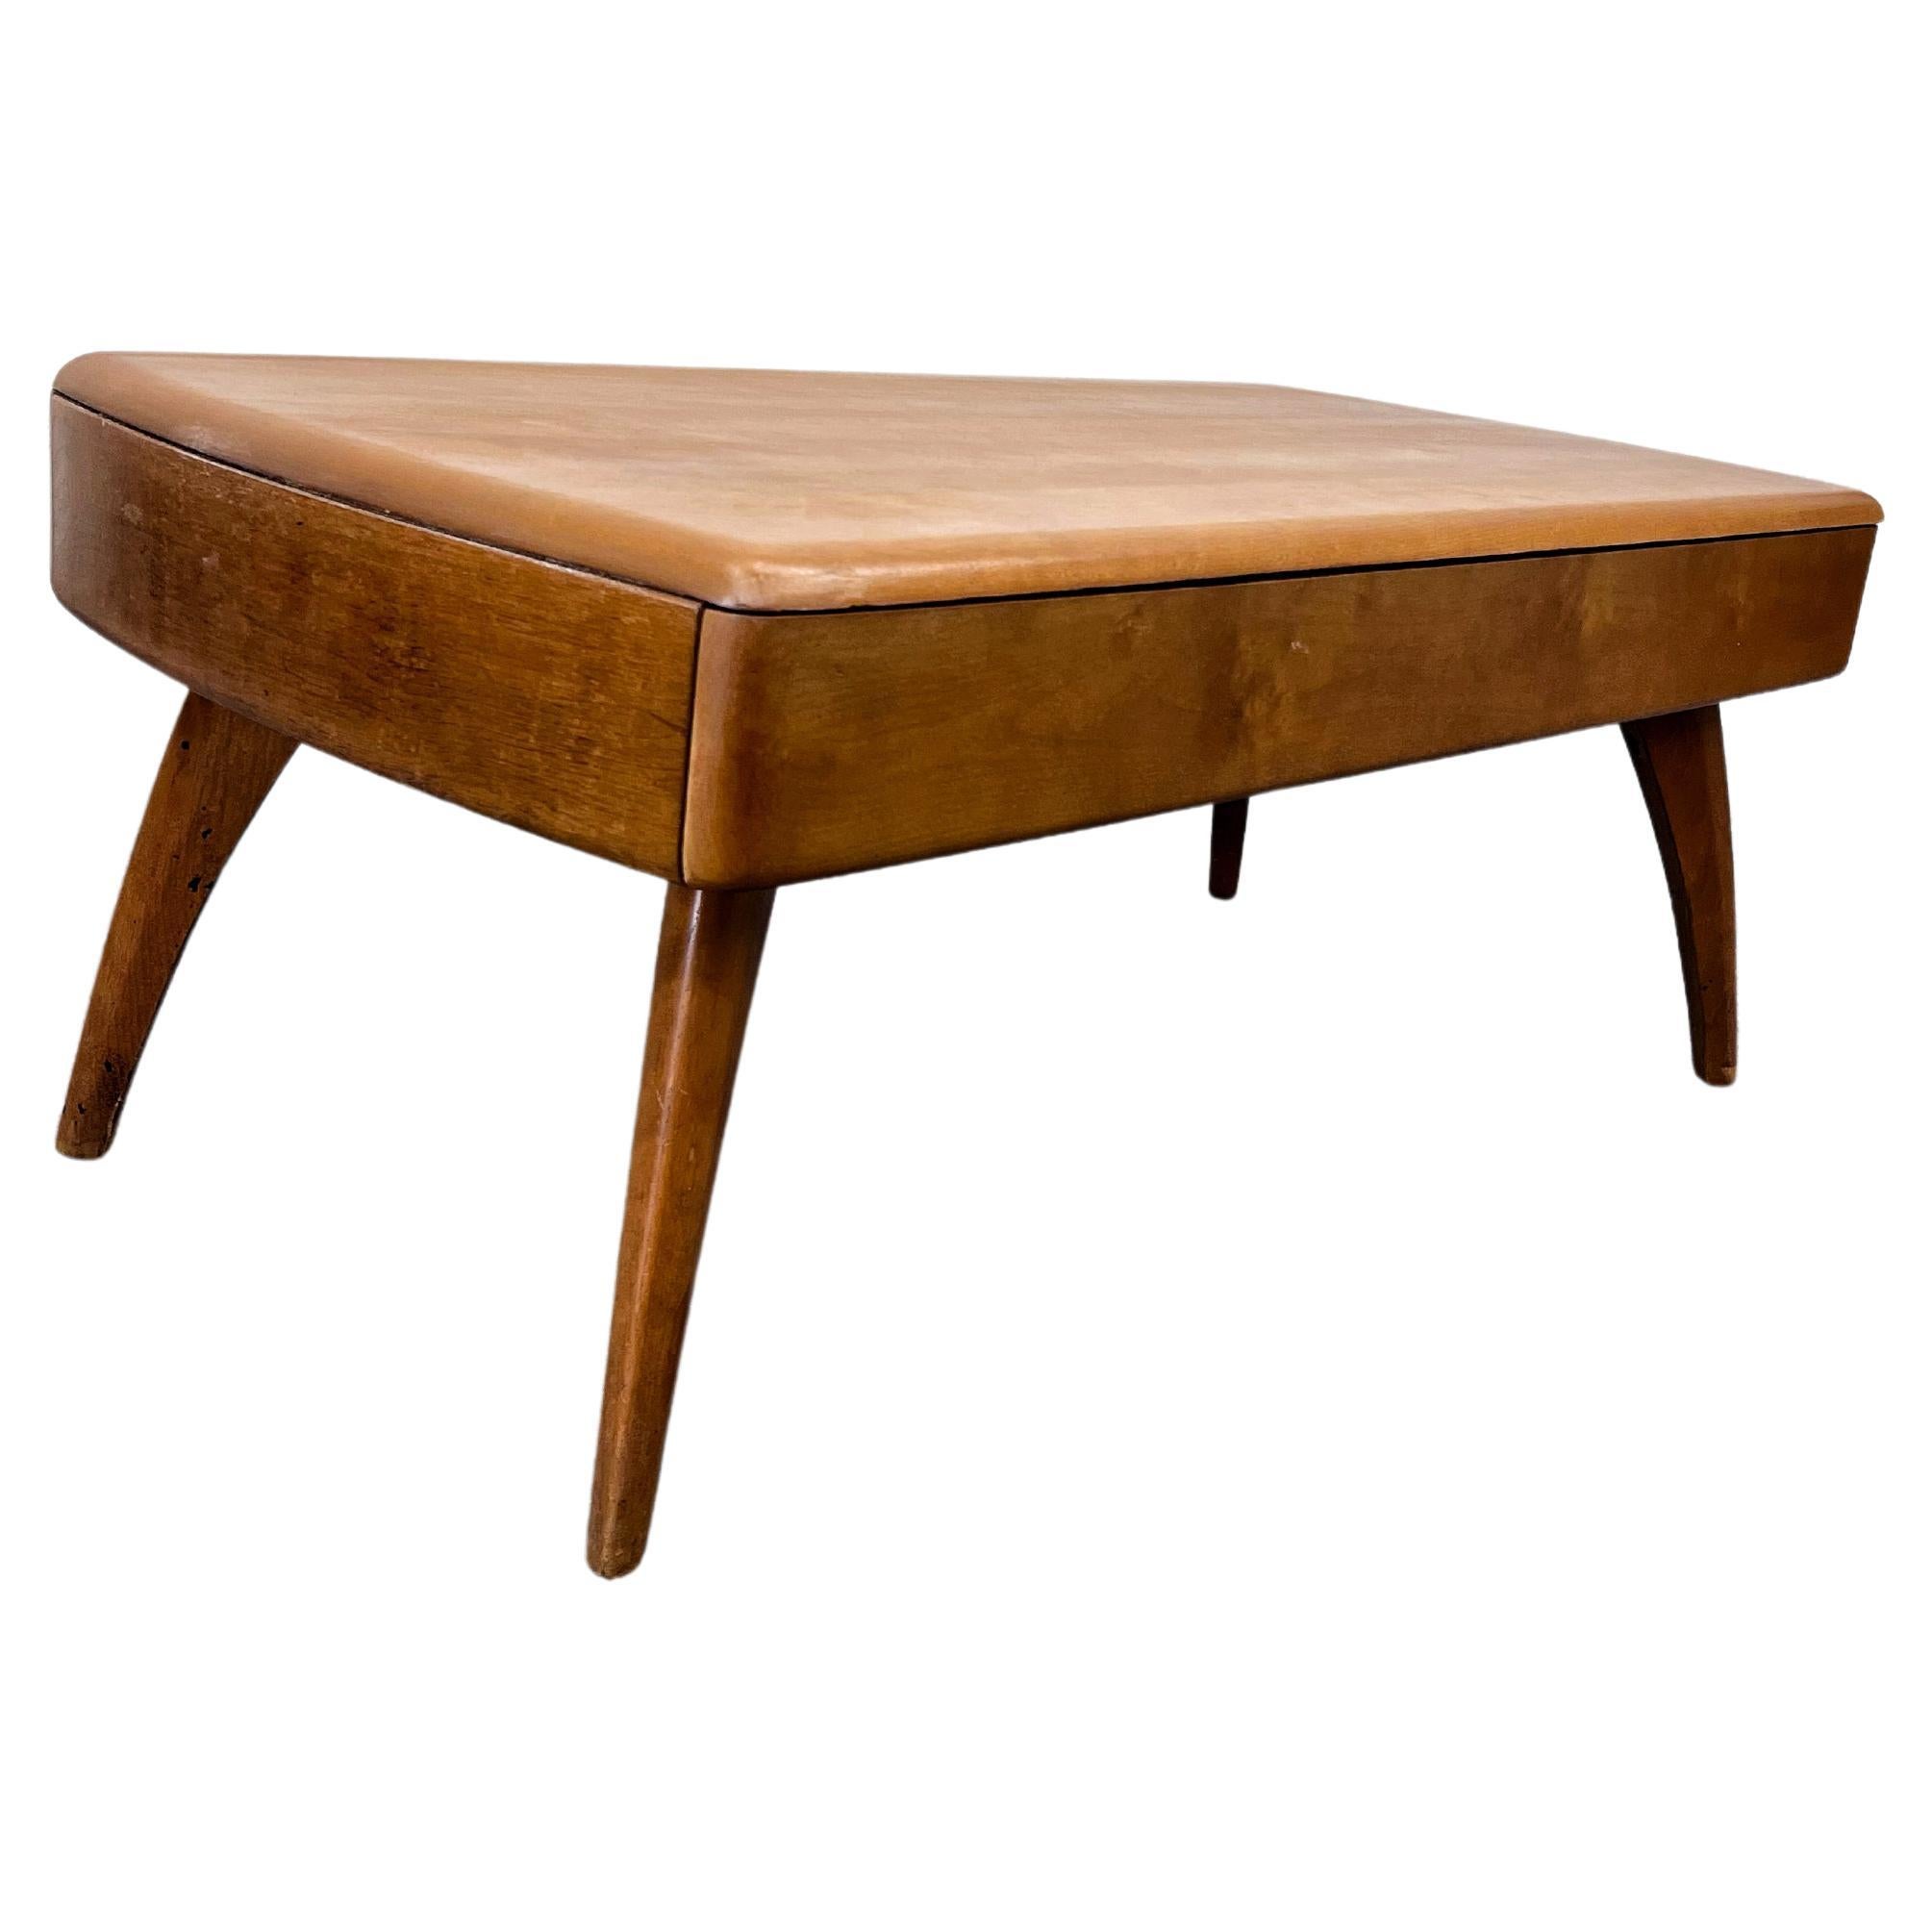  Heywood Wakefield Mid-Century Modern Coffee /Cocktail Table with Drawer